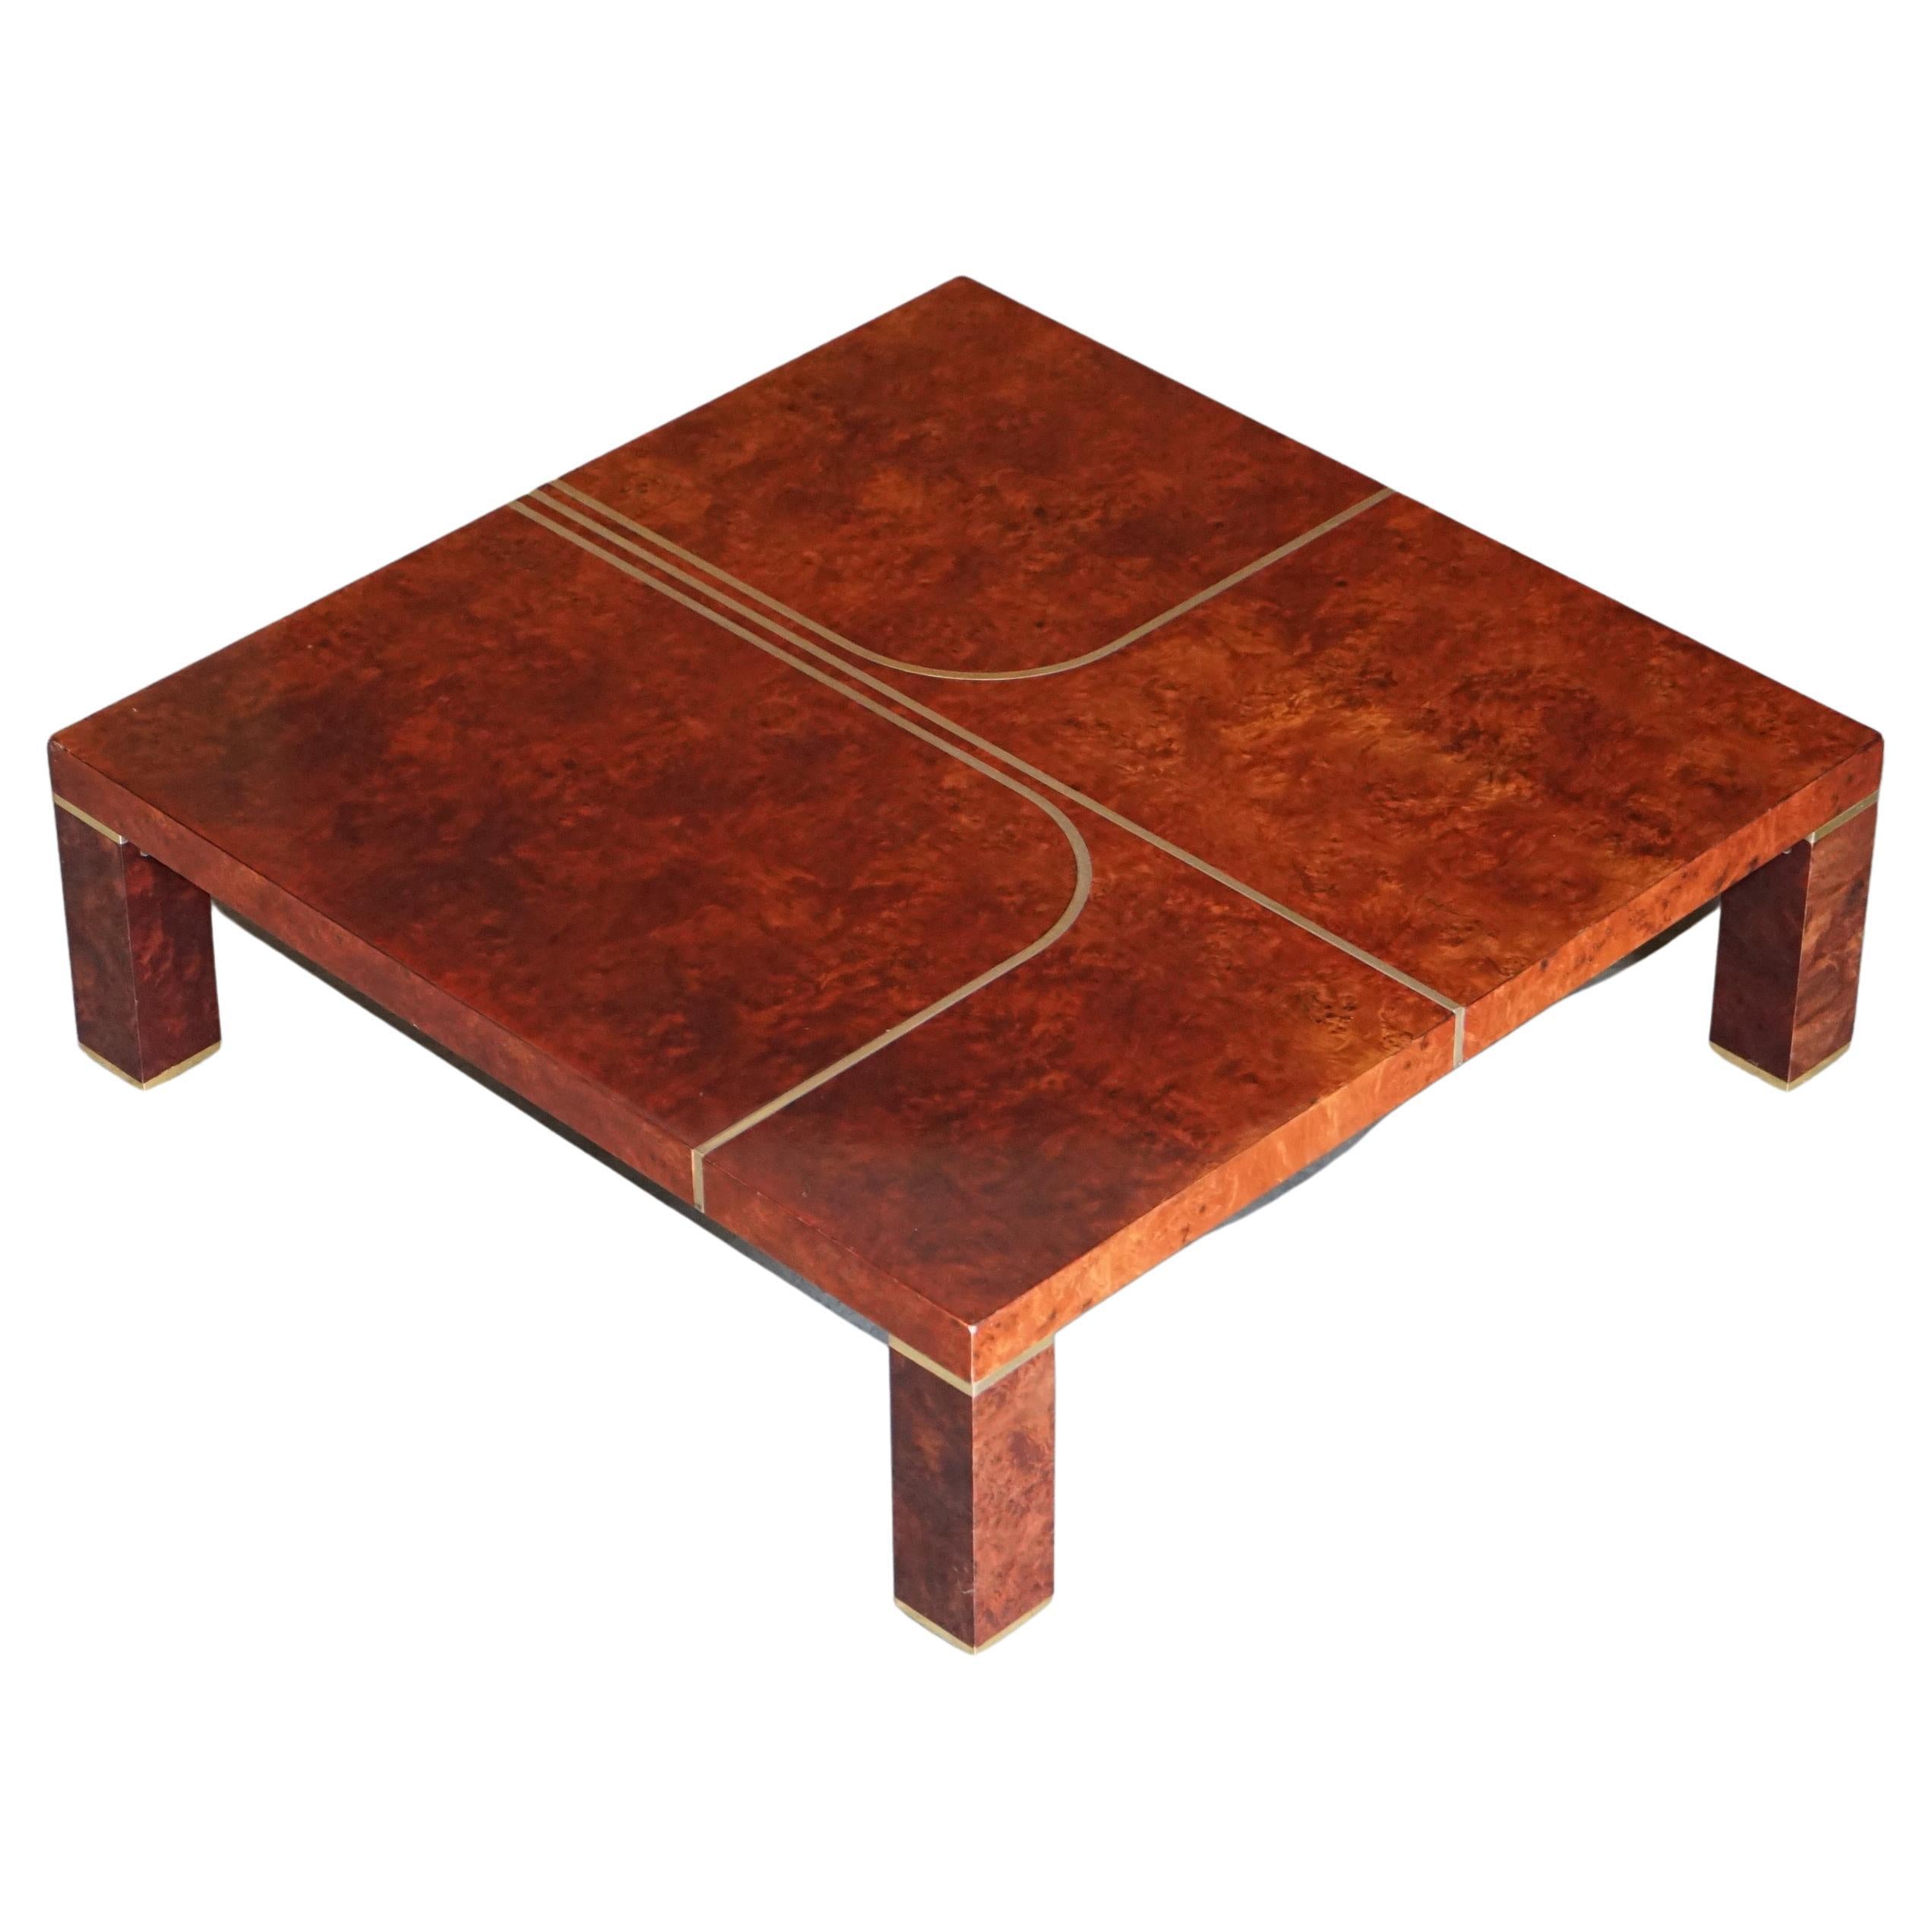 LARGE CONTEMPORARY ART MODERN BURR WALNUT, BRASS INALY COFFEE COCKTAiL TABLE For Sale